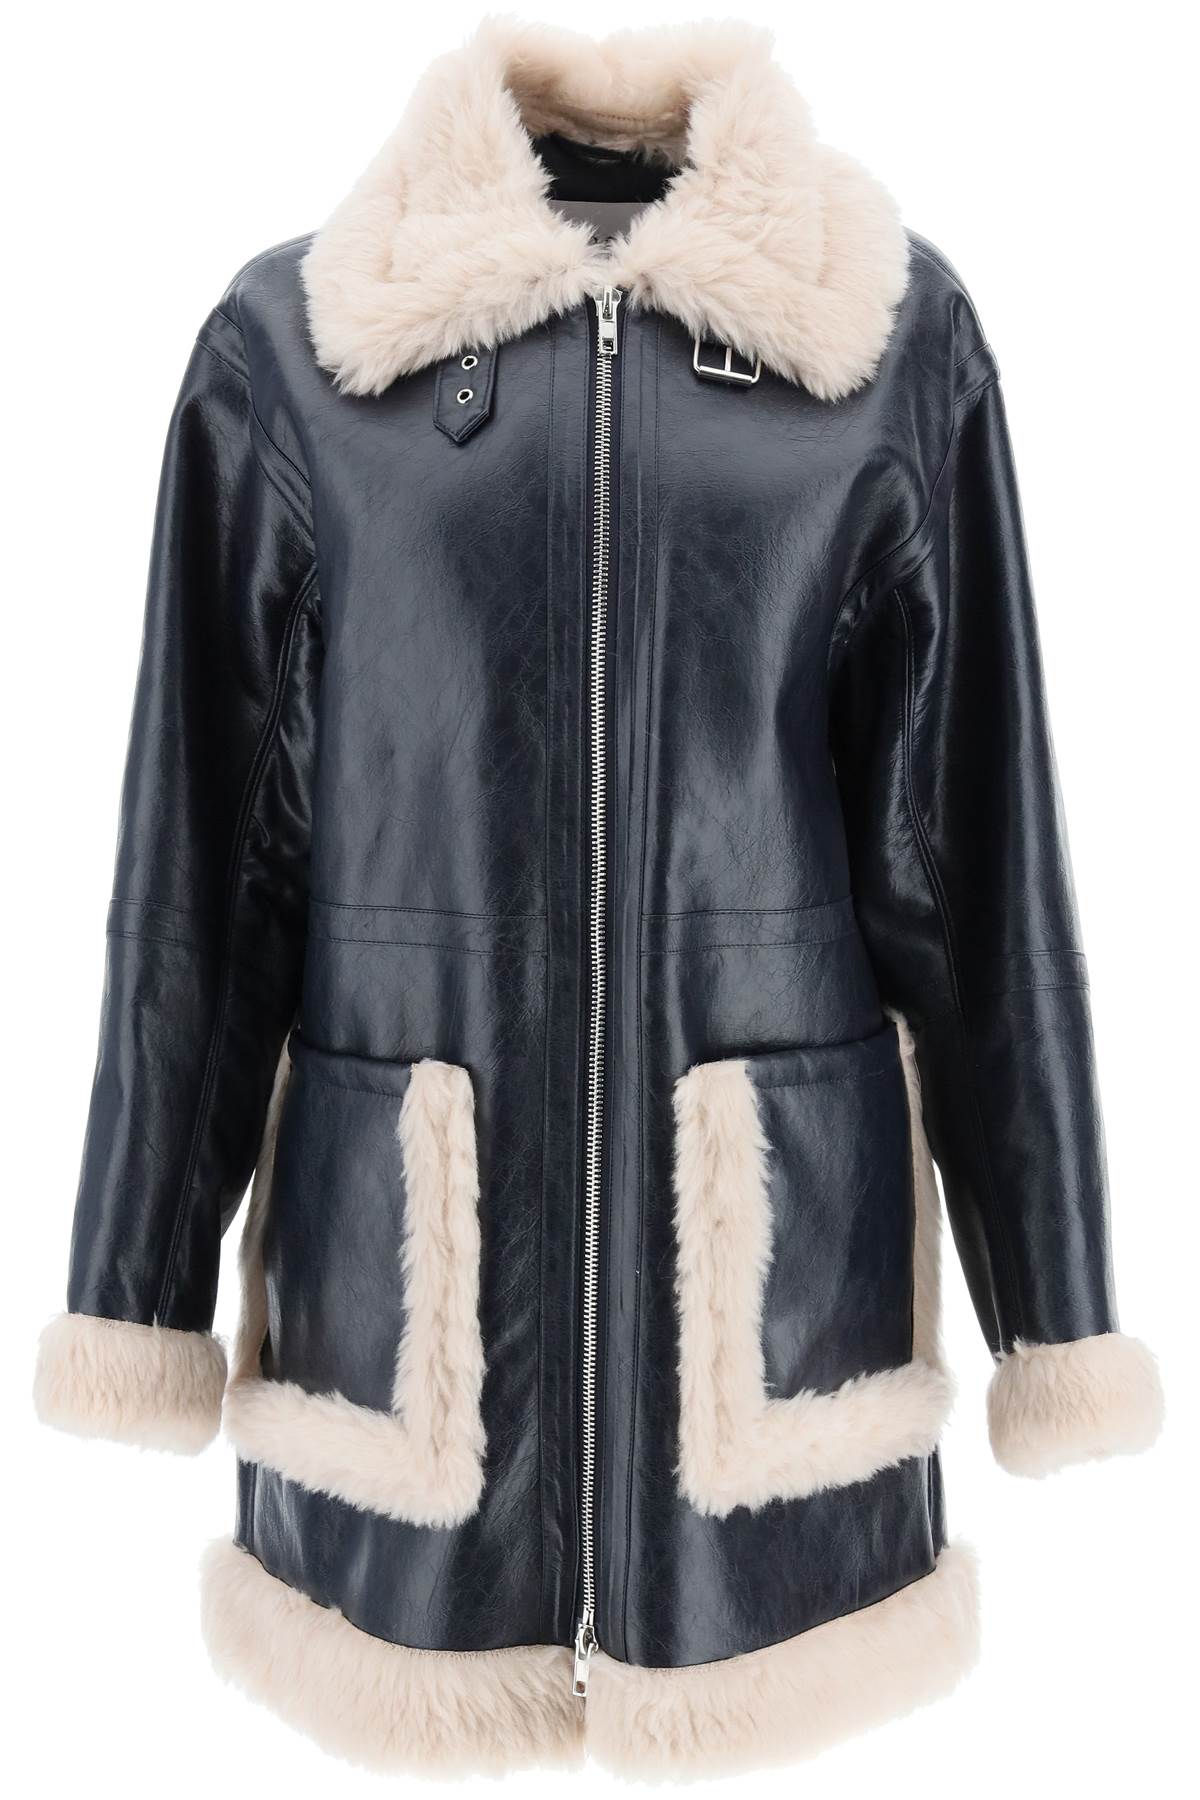 STAND STUDIO RINNA CRINCKLED FAUX LEATHER JACKET WITH ECO FUR